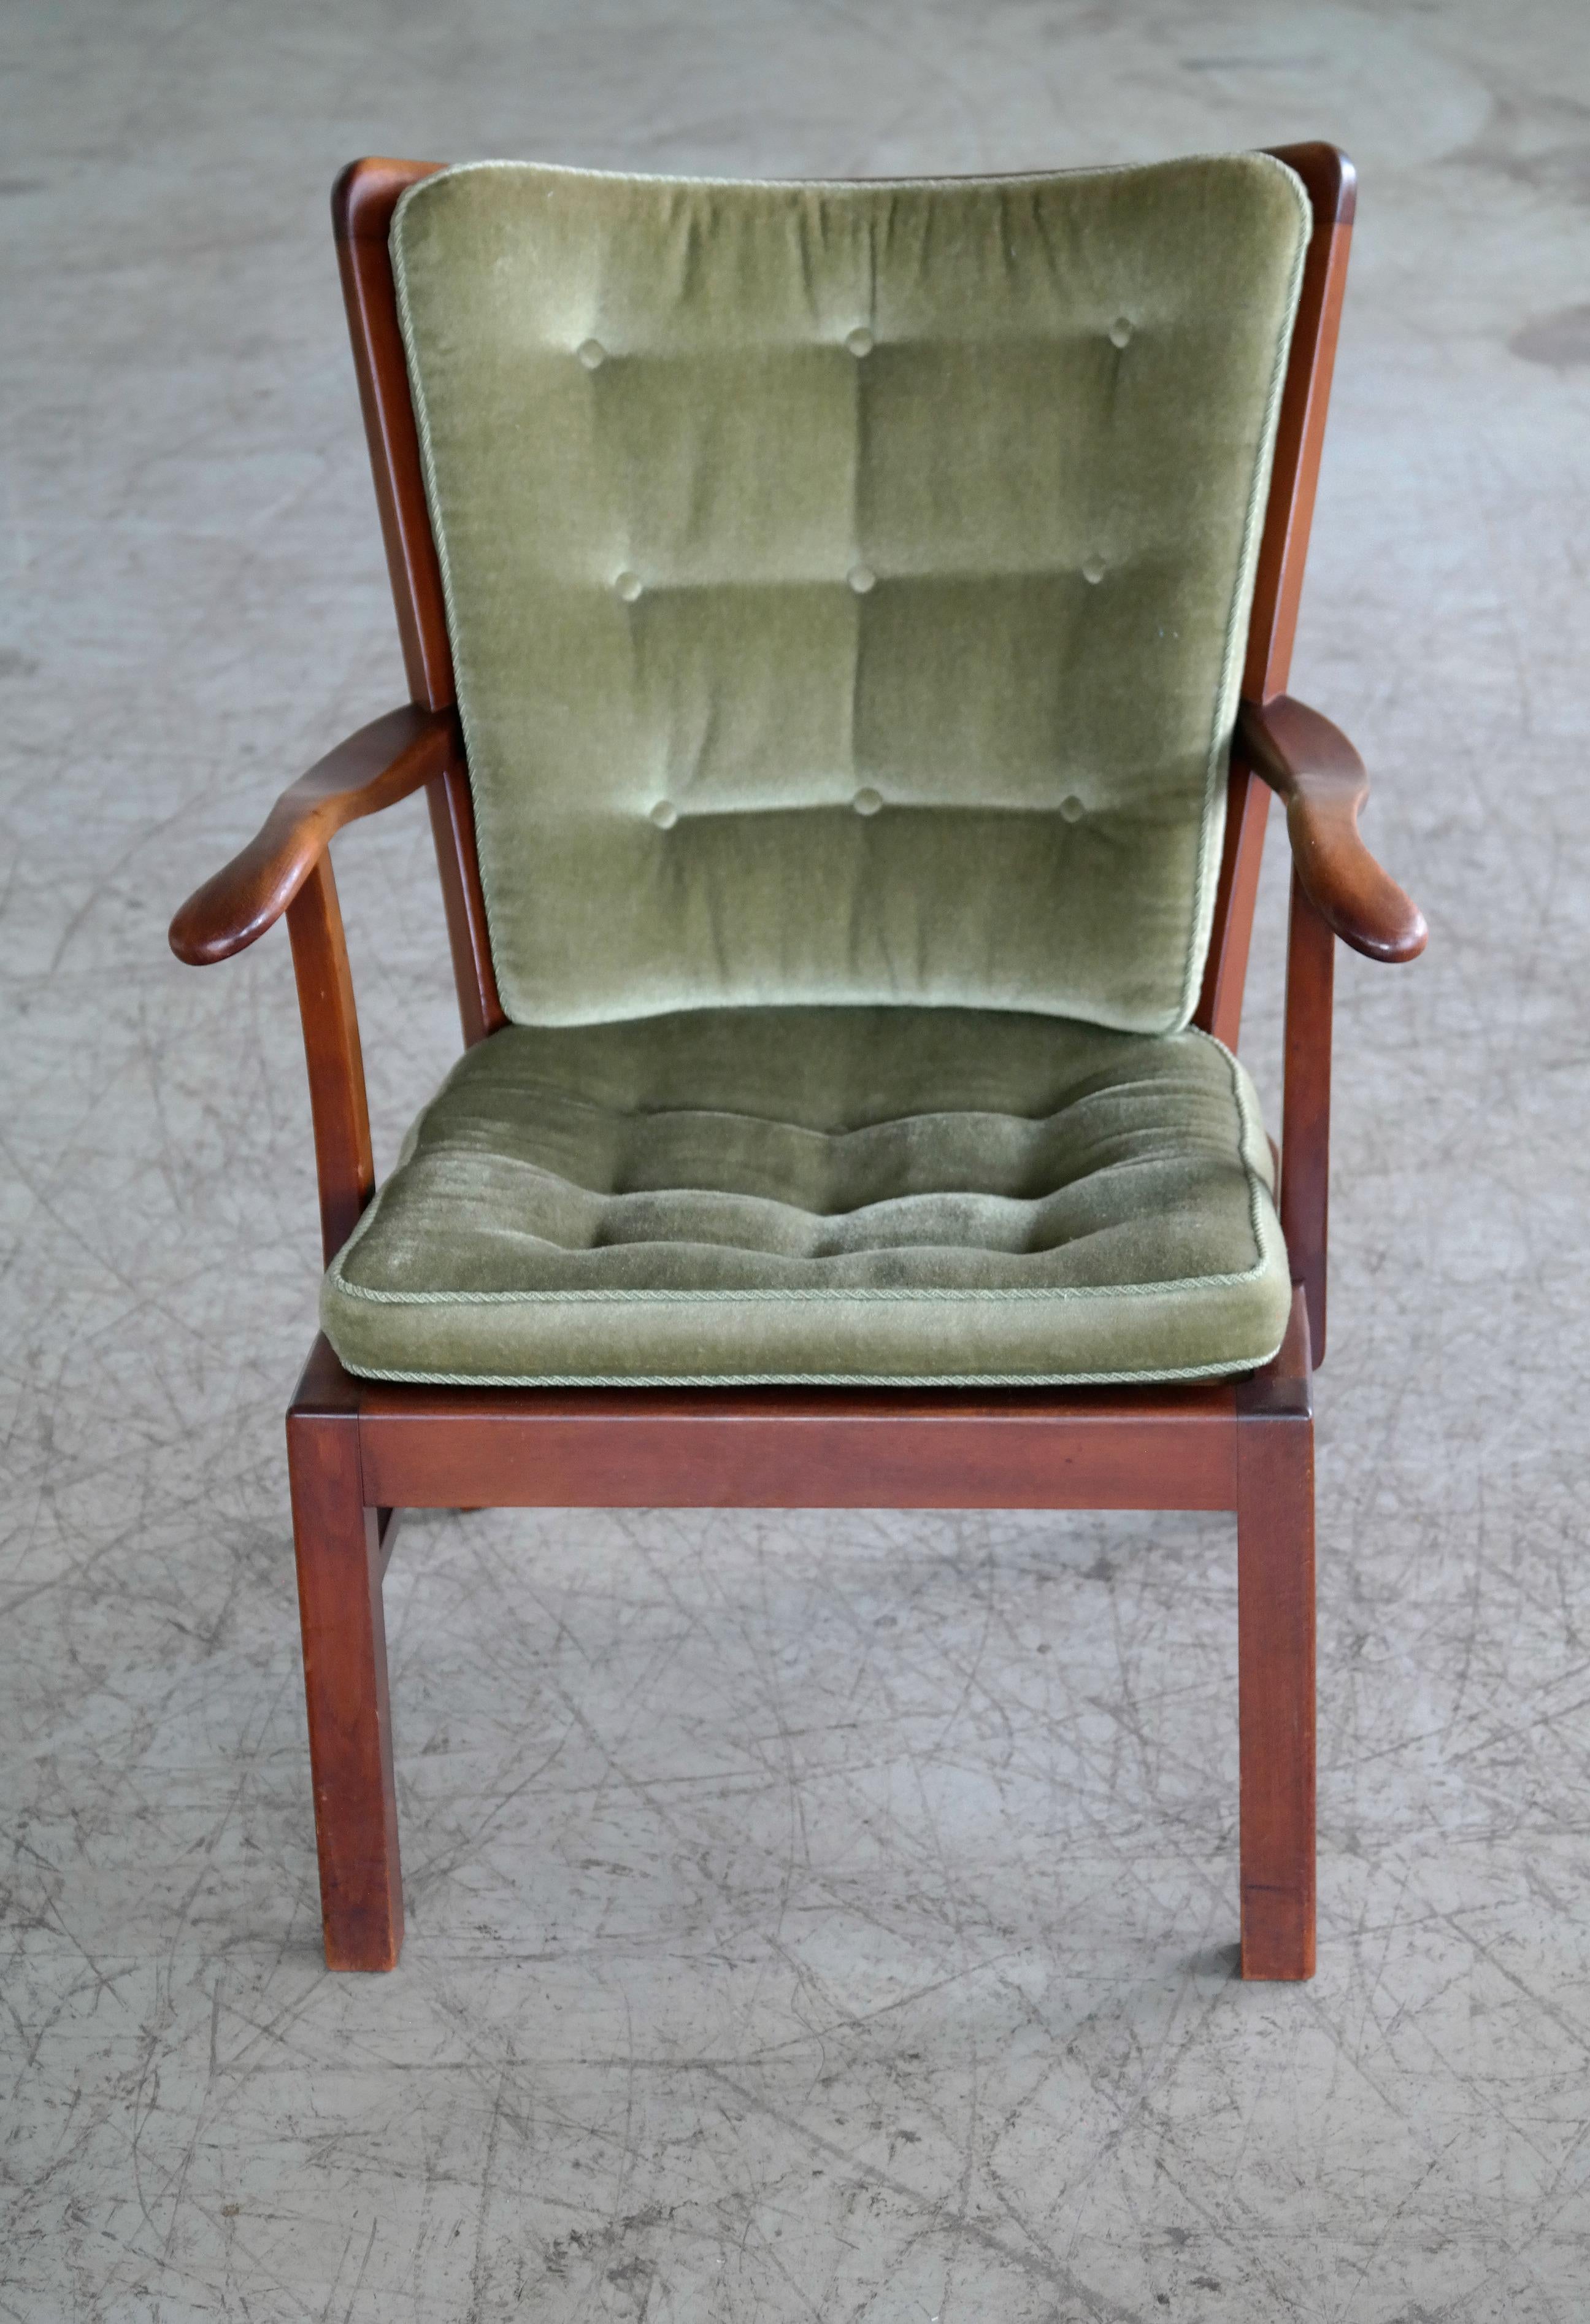 Sculptural and very beautiful 1940s open arm lounge chair with spindle back. Made from stained and varnished beech wood by Master furniture maker Fritz Hansen in the 1940s as Model 1628. The chair is marked 